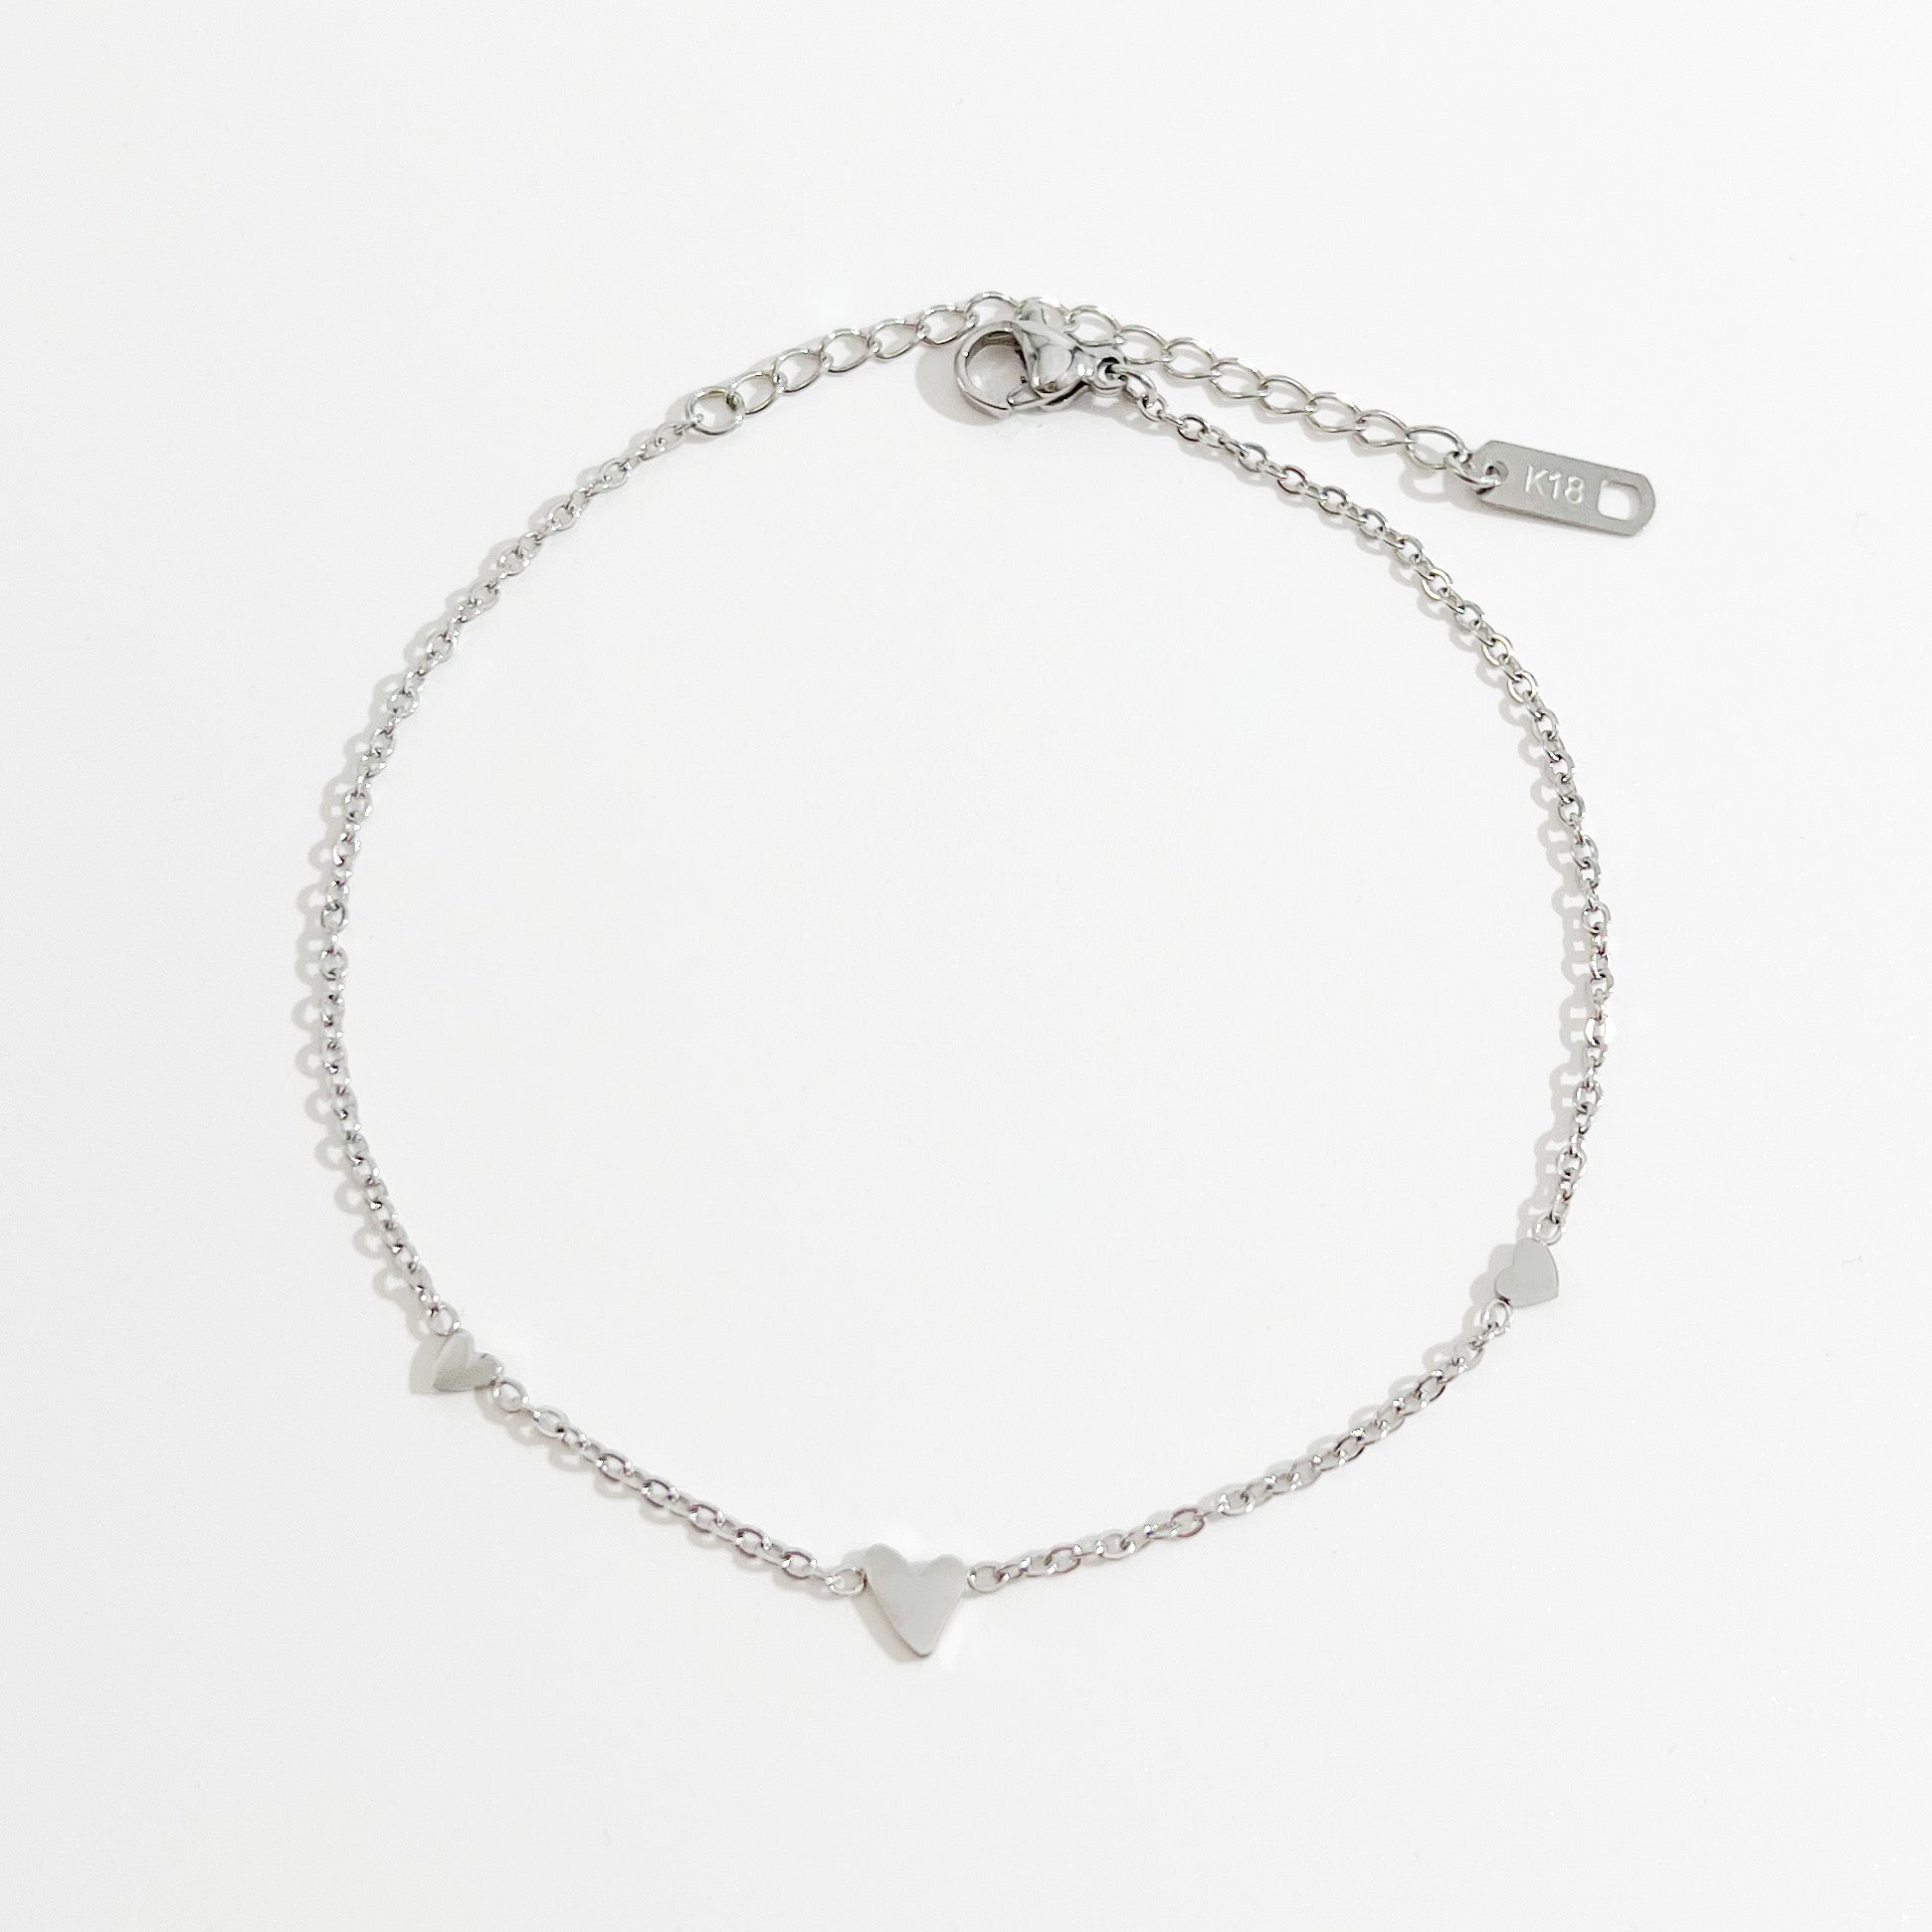 Trio Heart Silver Anklet - Flaire & Co.